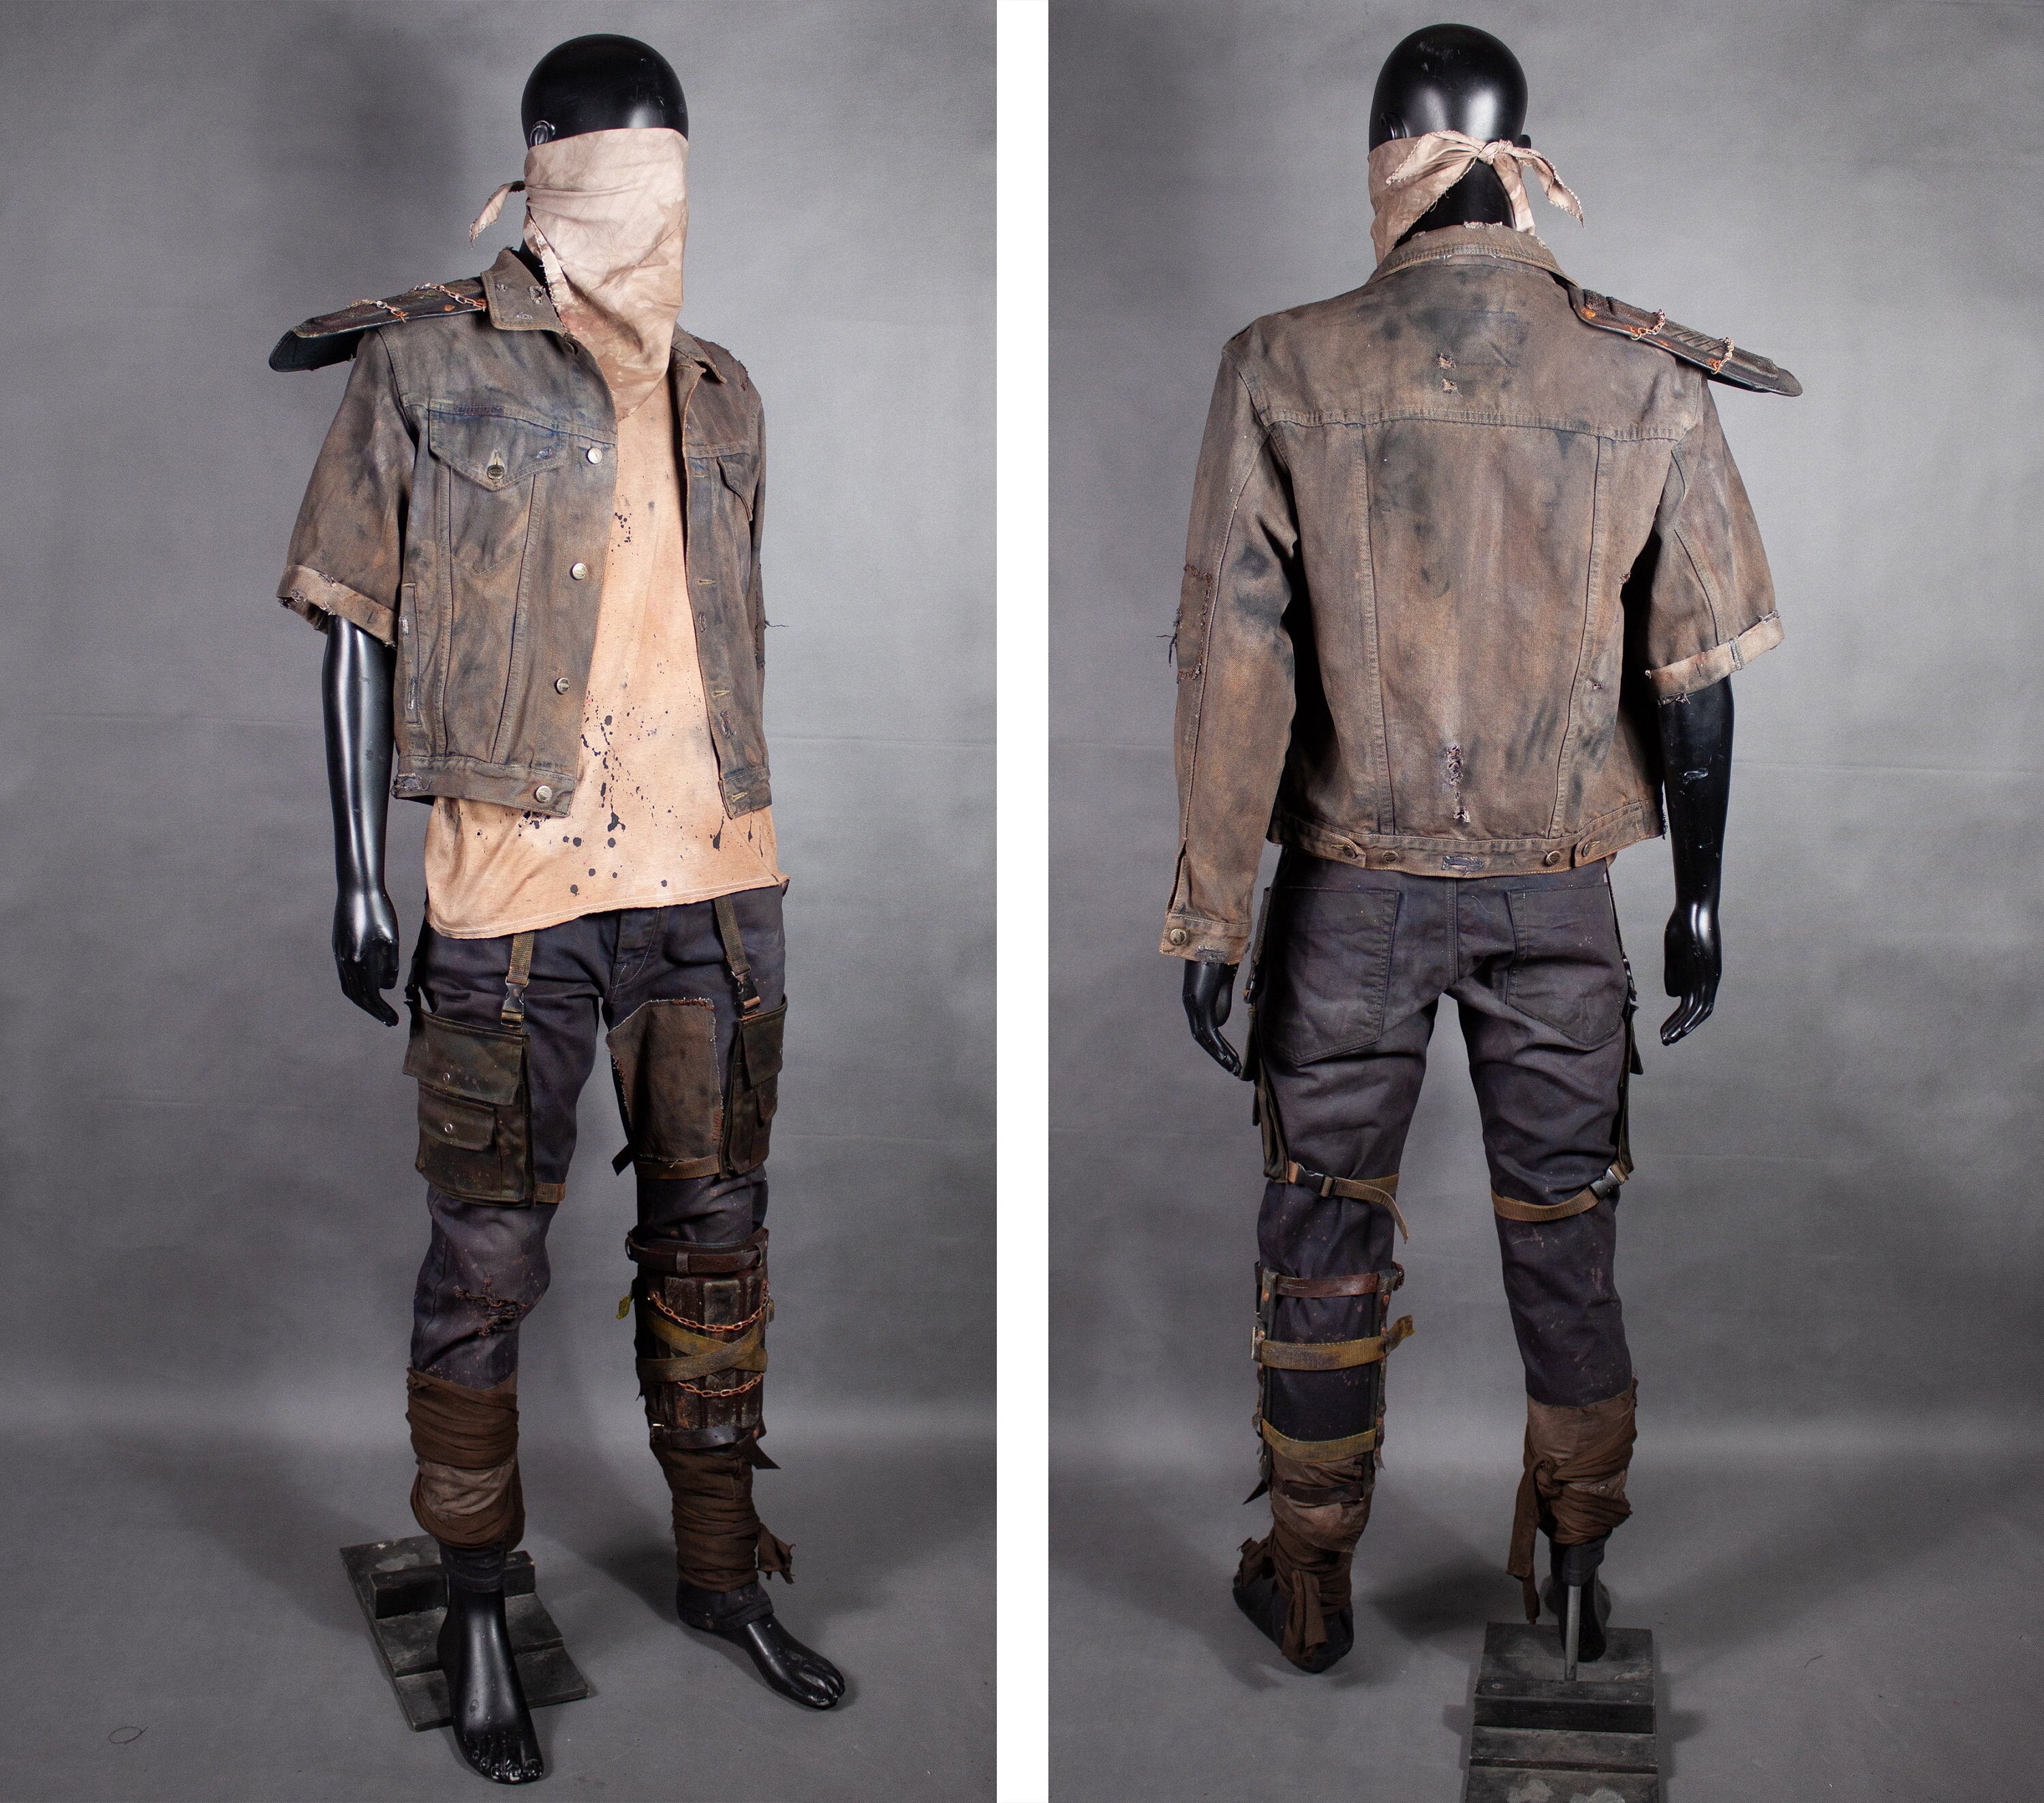 Pin by Legna on Disfraces  Mad max costume, Apocalyptic fashion, Post  apocalyptic costume